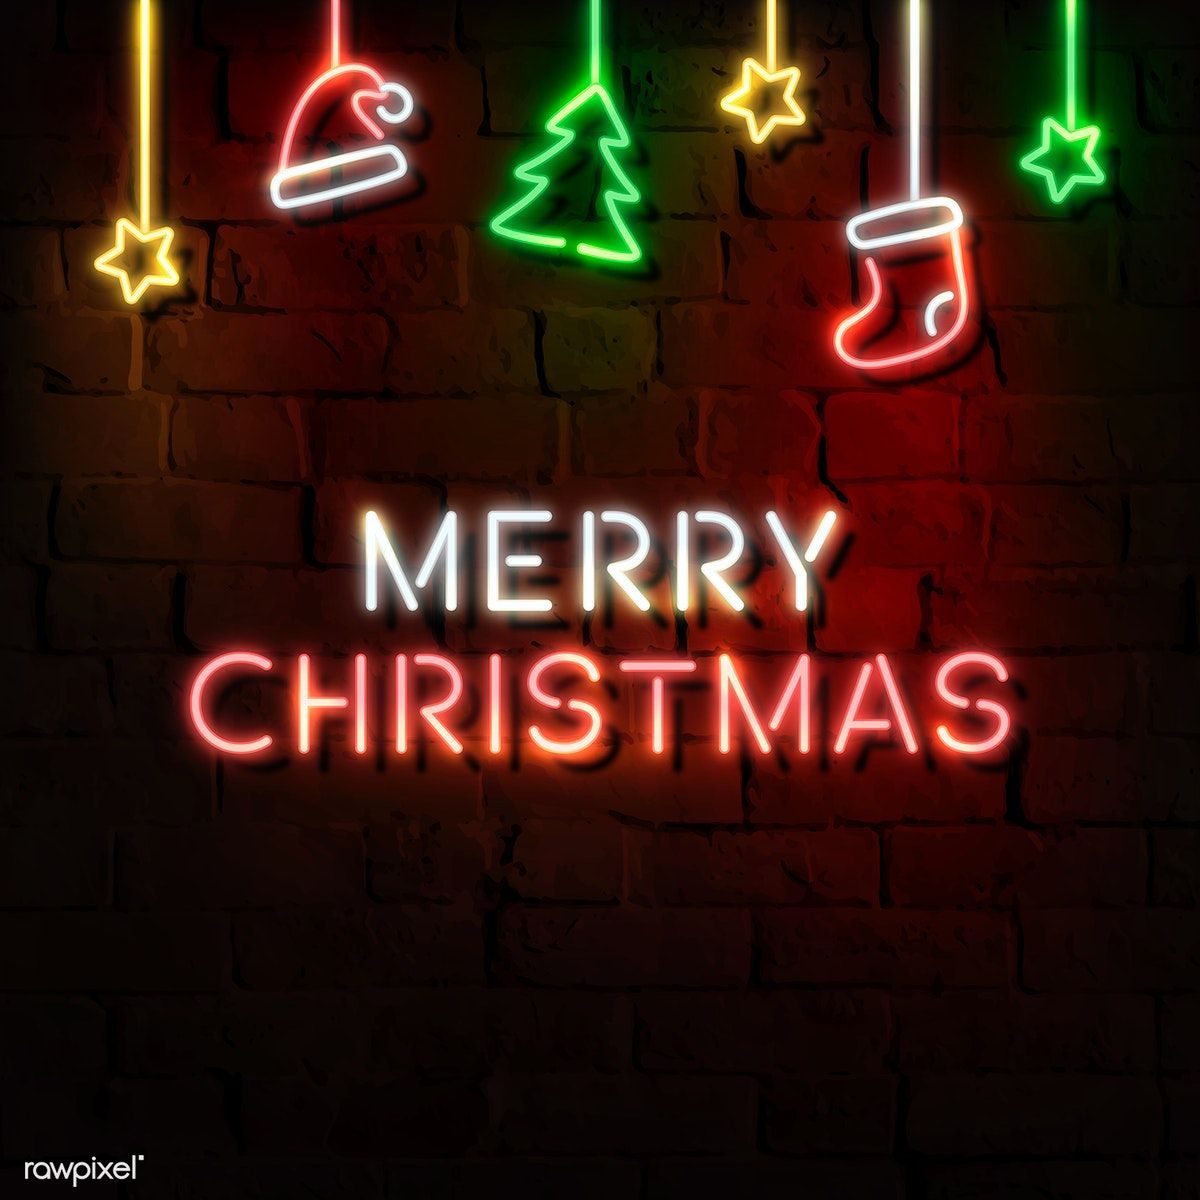 Download premium vector of Stars, Santa hat, stocking, pine tree and Merry. Xmas wallpaper, Merry christmas picture, Neon signs